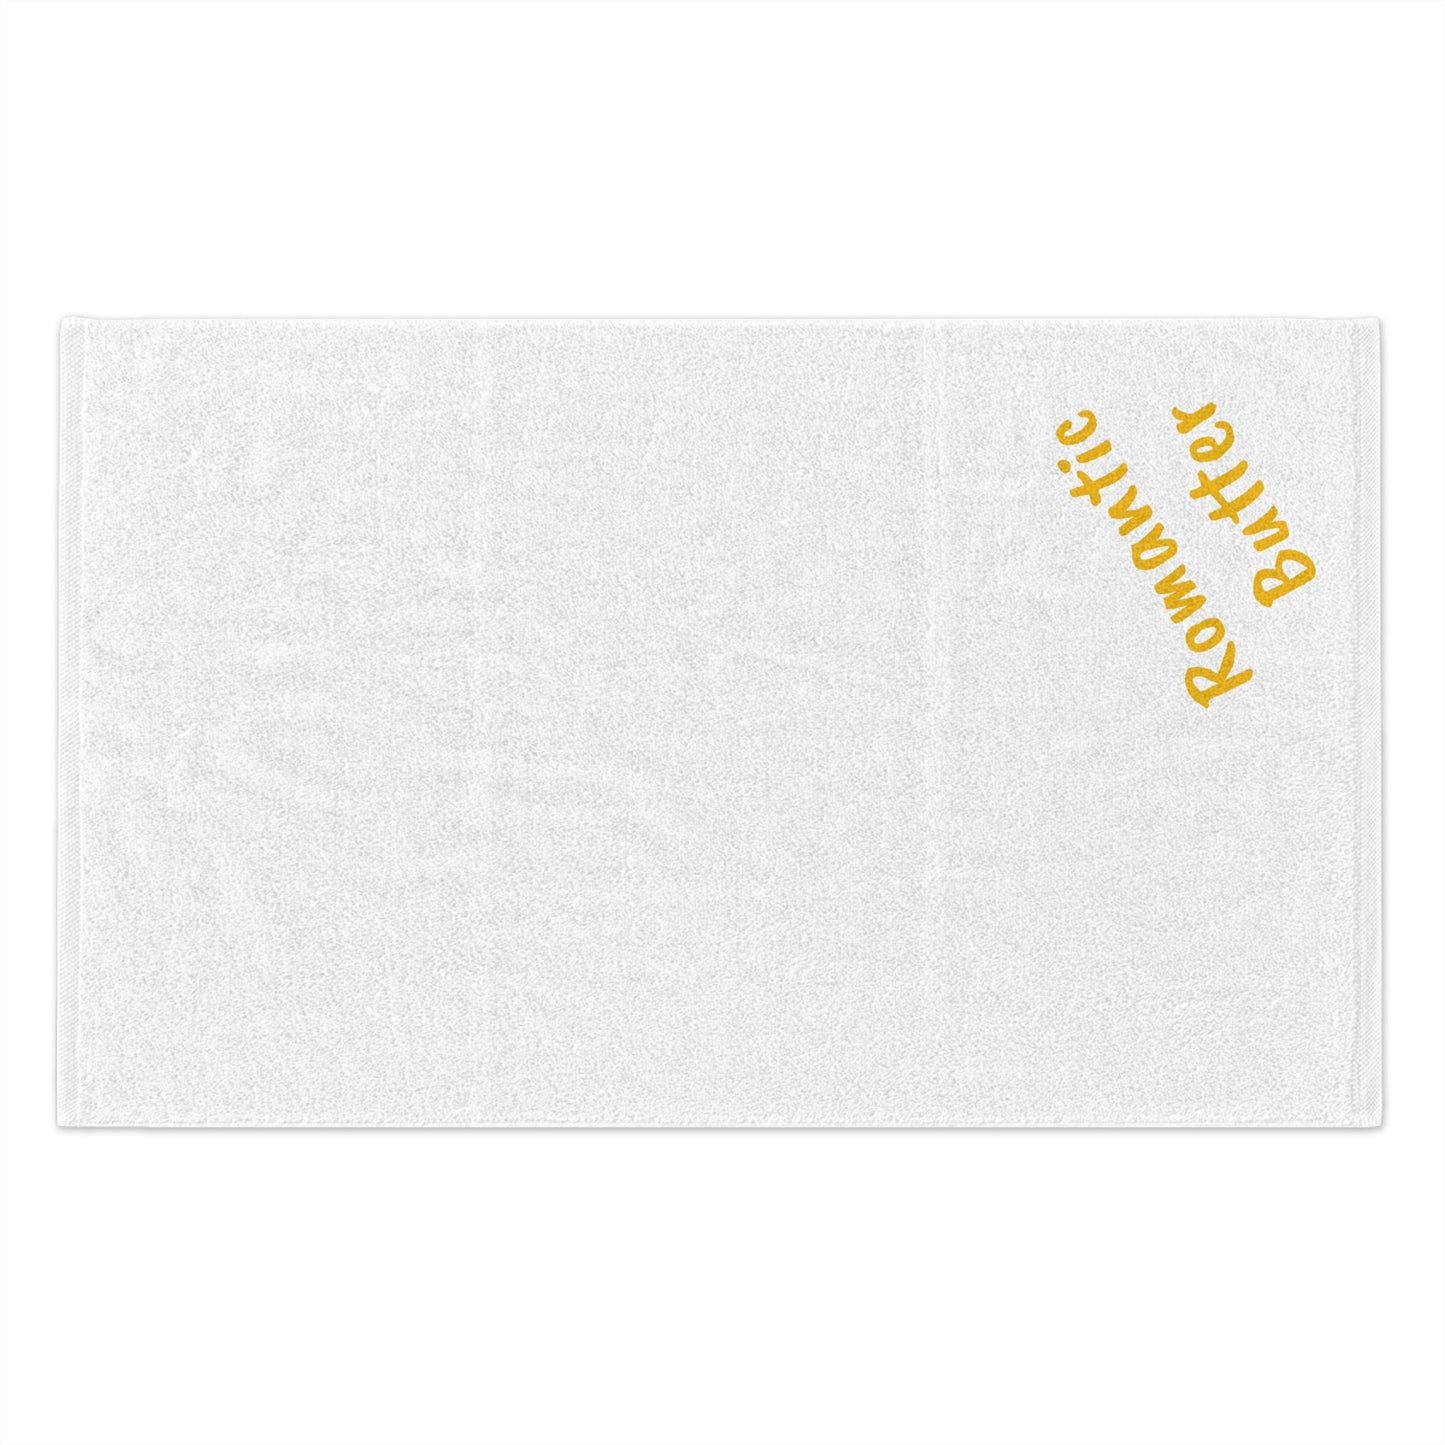 HMNS Podcast "Romantic Butter" clean up towel